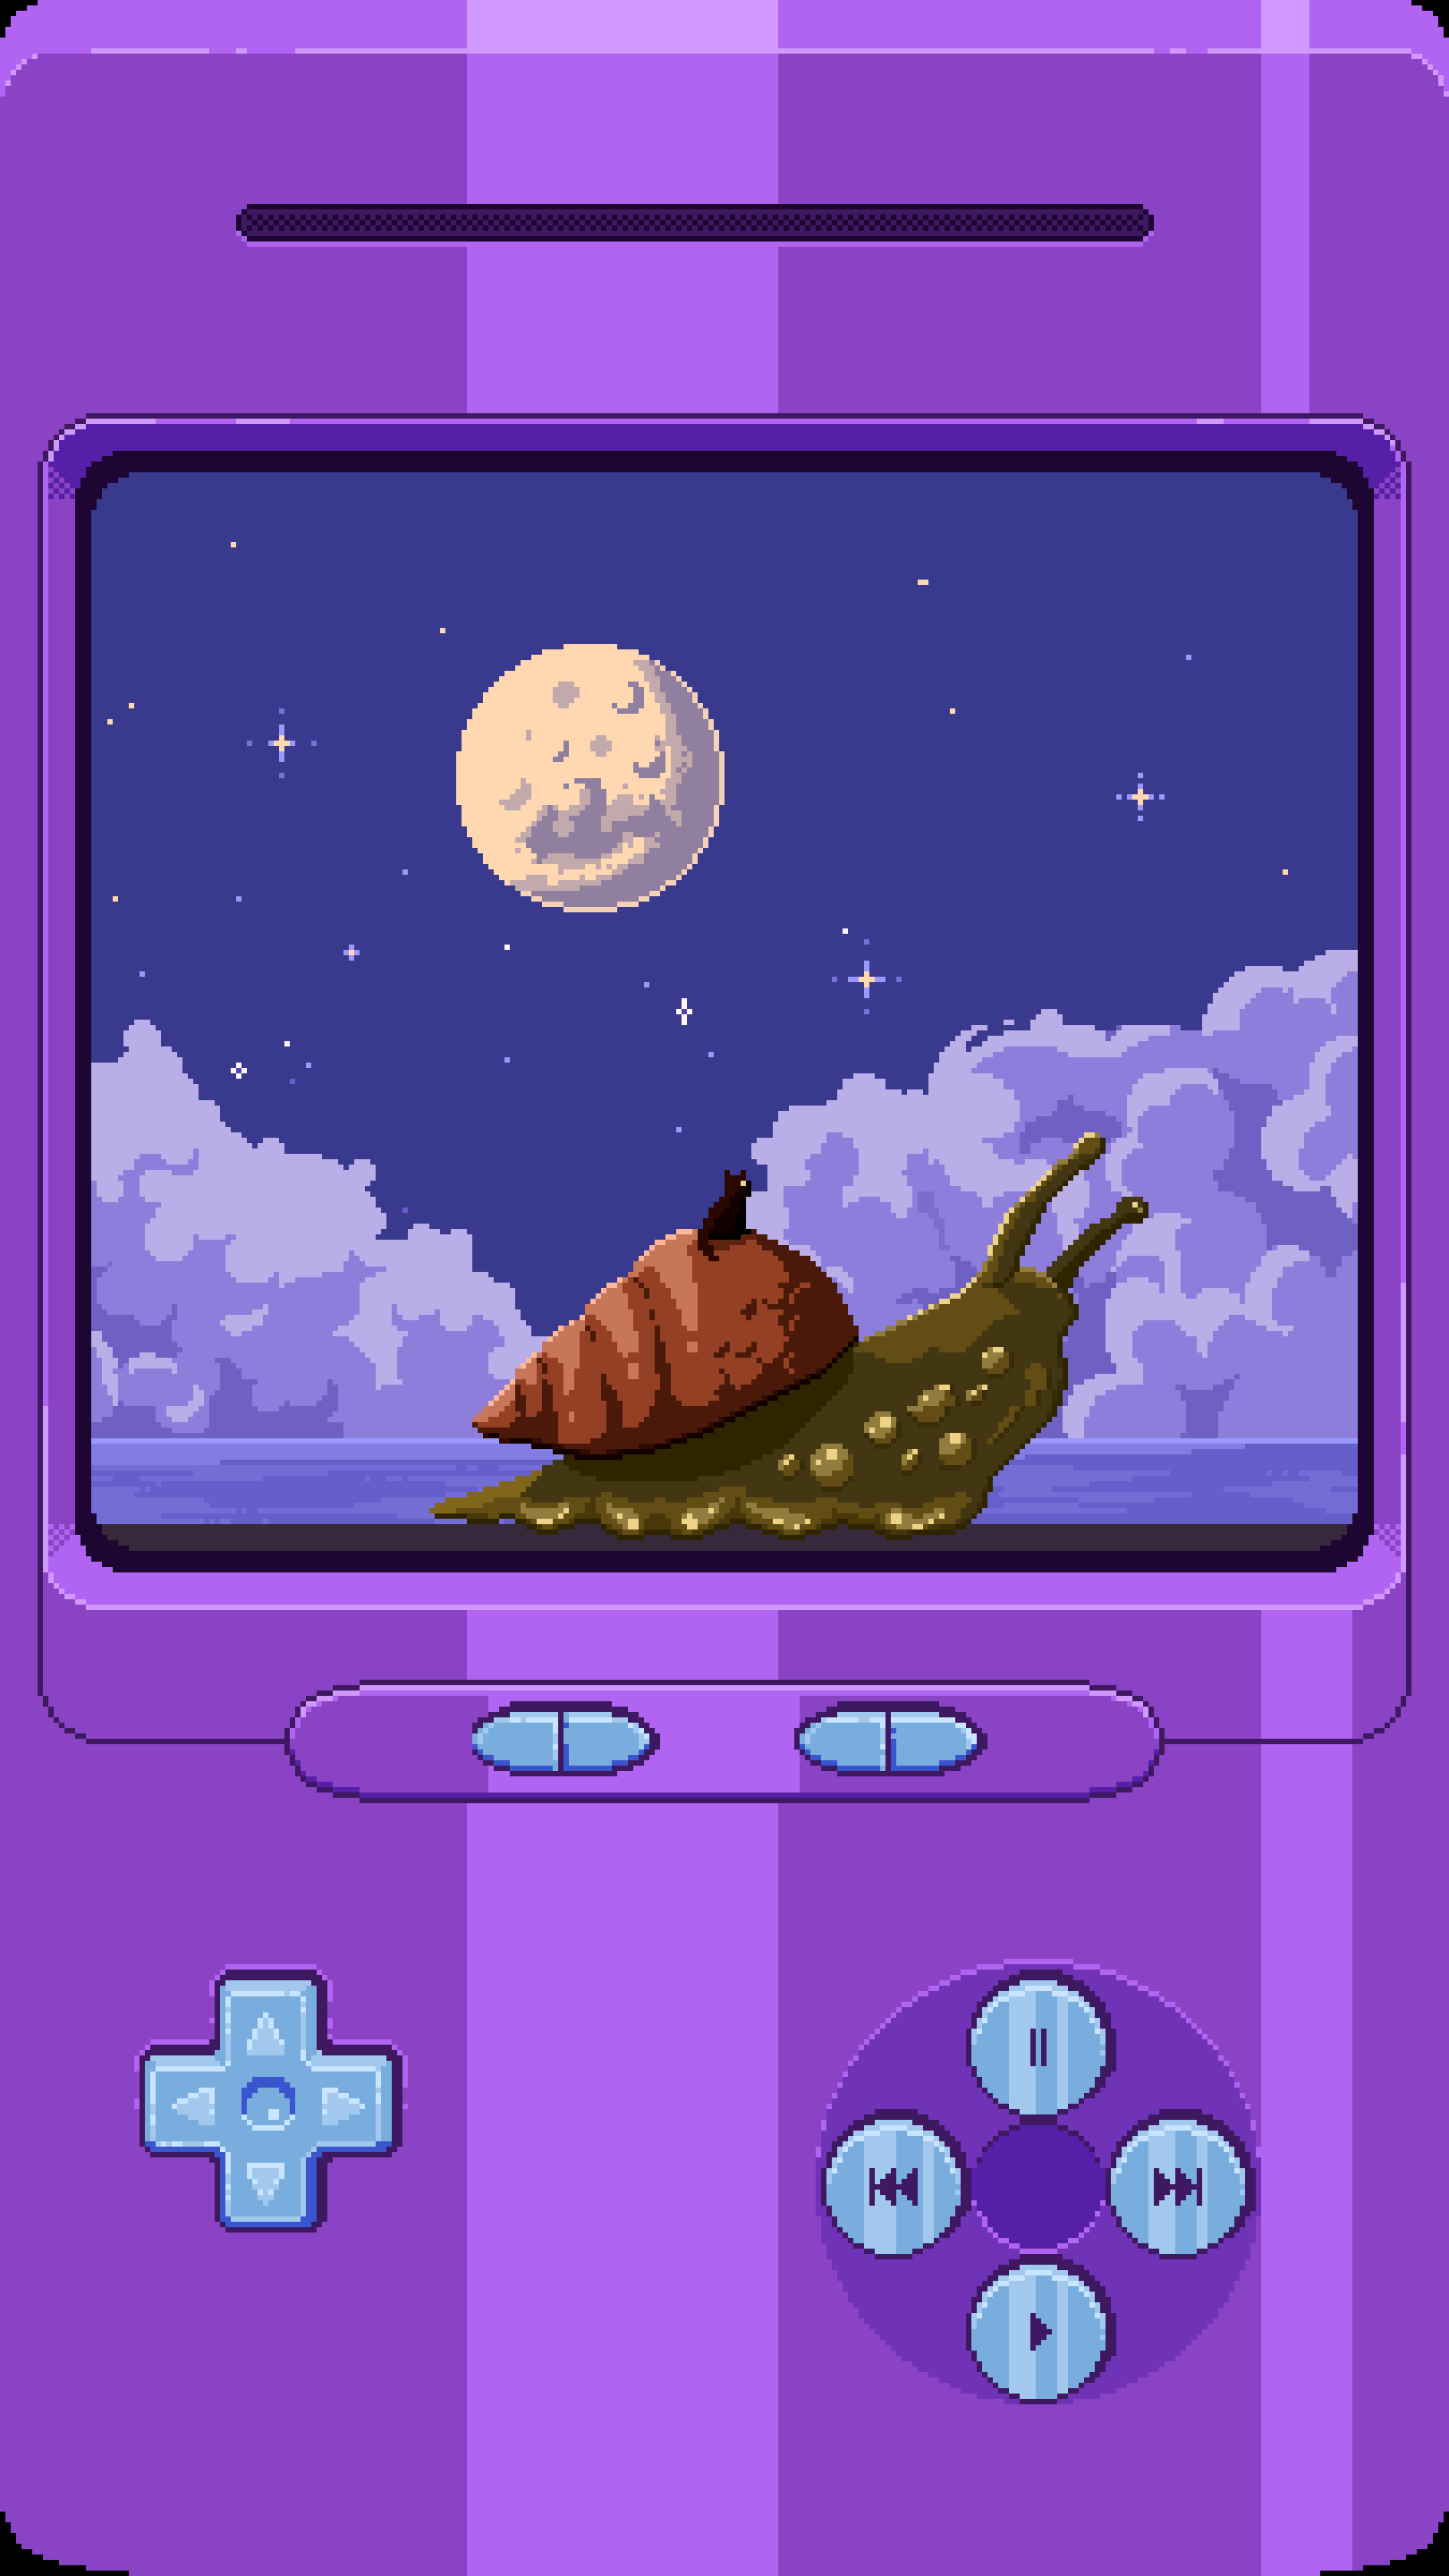 Purple 16:9 Pixel Art Wallpaper Pack Kheyfets's Ko Fi Shop Fi ❤️ Where Creators Get Support From Fans Through Donations, Memberships, Shop Sales And More! The Original 'Buy Me A